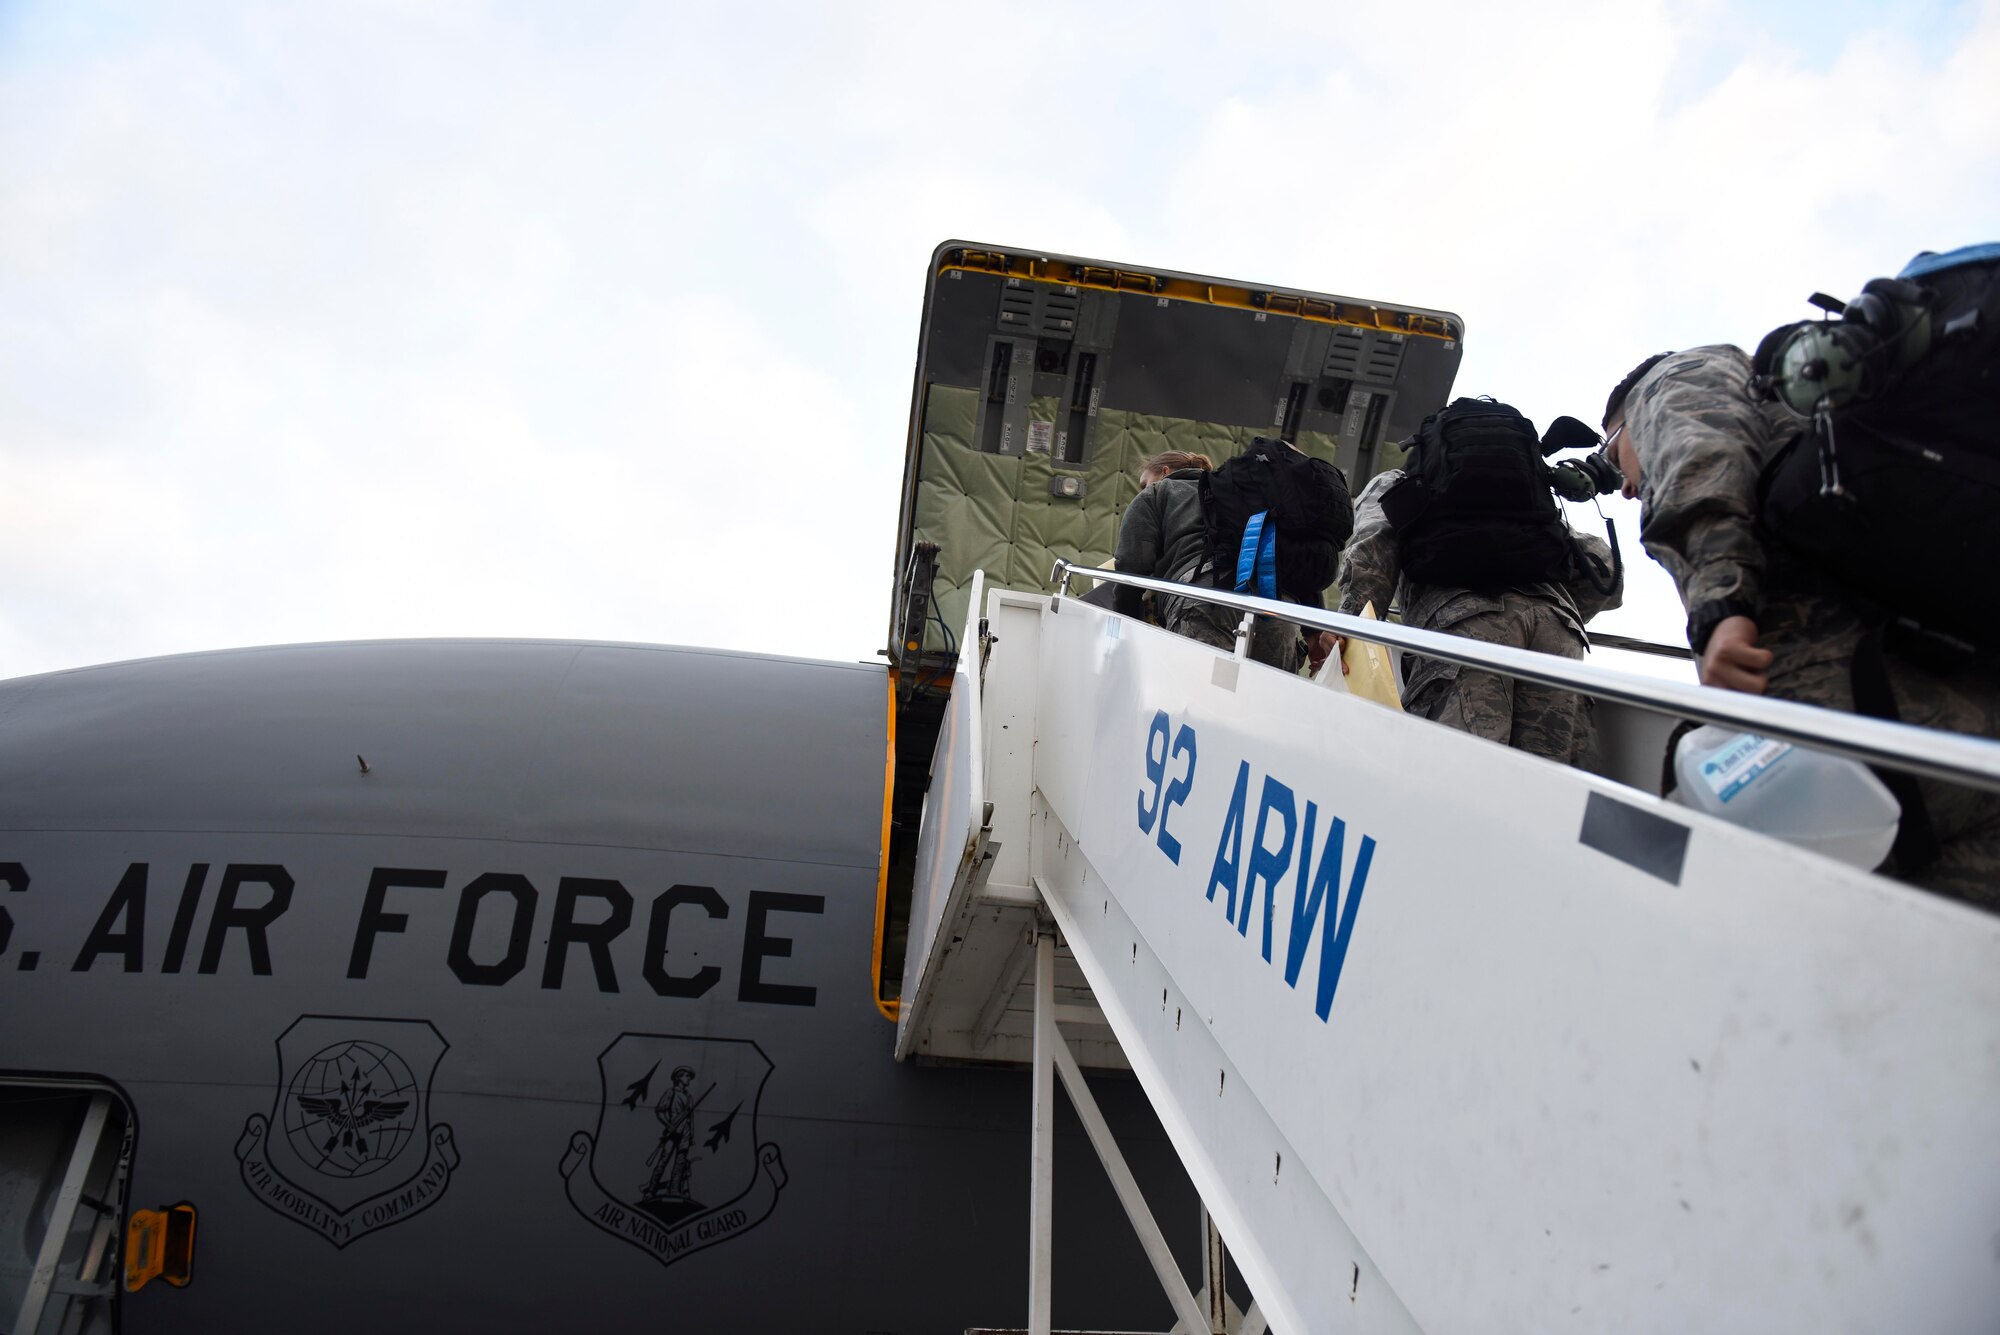 Service members from Fairchild board a KC-135 Stratotanker to depart in support of Operation Juniper Micron at Fairchild Air Force Base, Washington, September 2018. Fairchild's KC-135 Stratotankers have assist with allied operations worldwide, providing Global Reach to American and allied aircraft. (U.S. Air Force photo/Airman 1st Class Lawrence Sena)